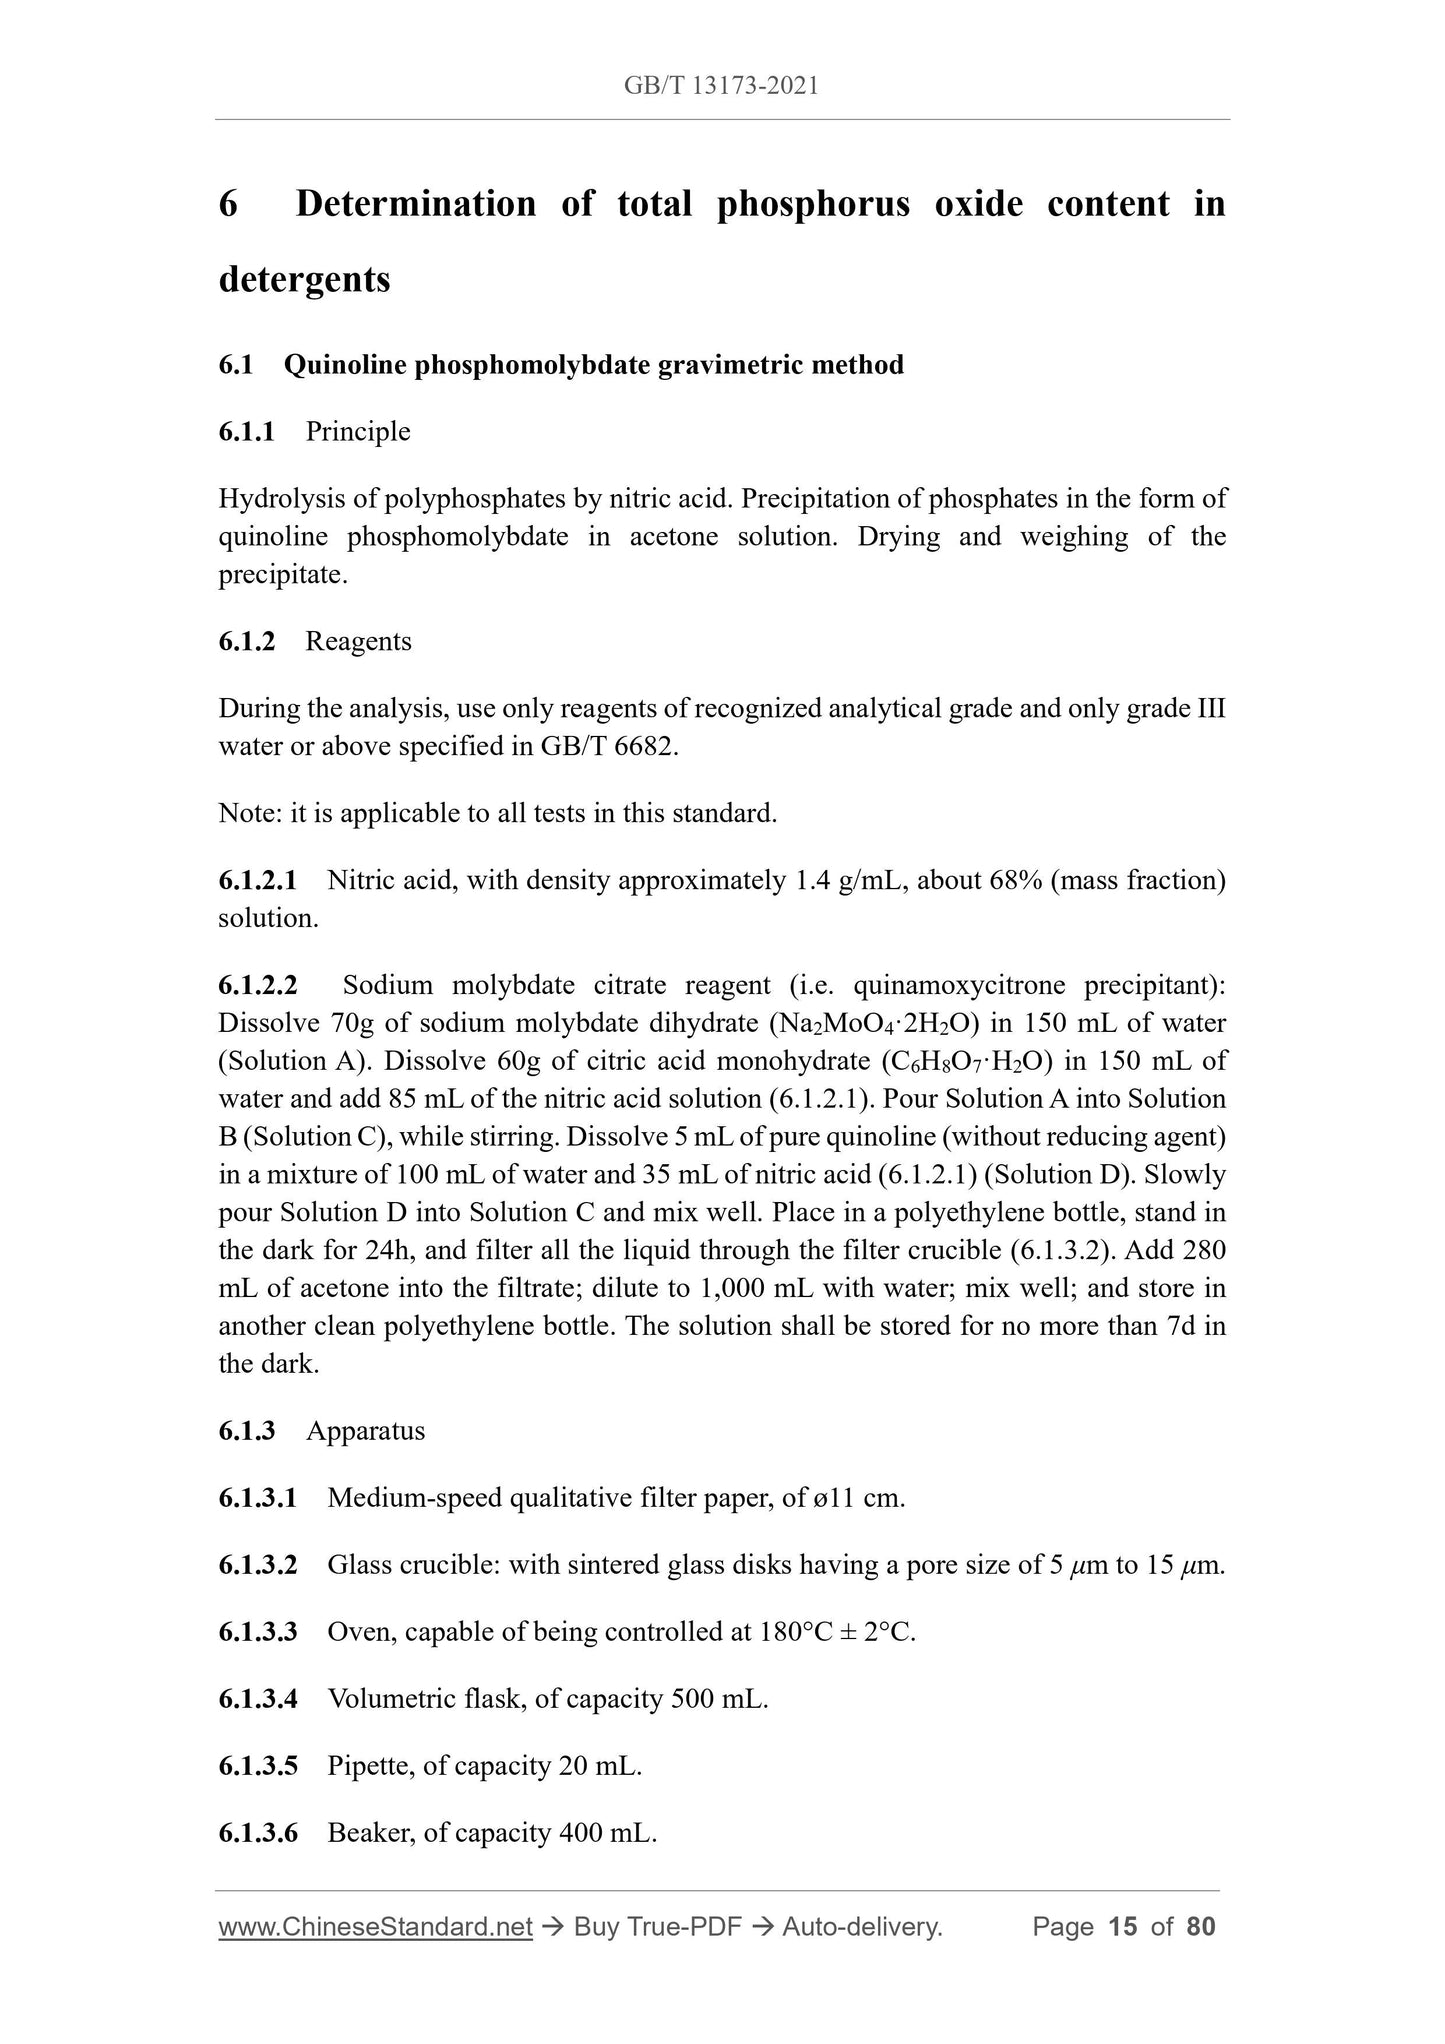 GB/T 13173-2021 Page 6